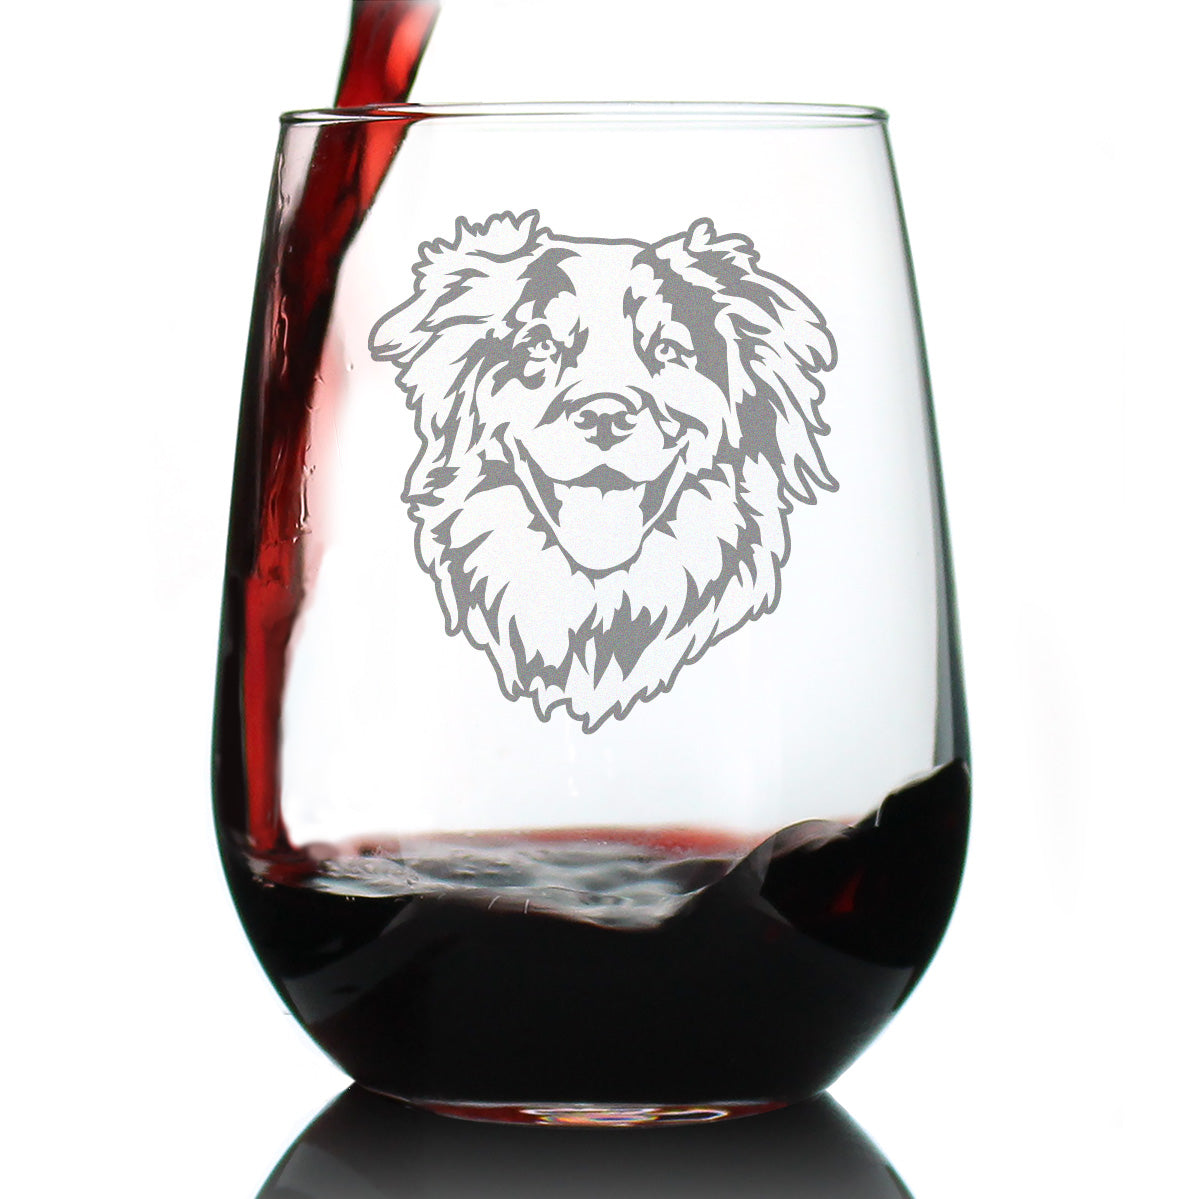 Australian Shepherd Face Stemless Wine Glass - Cute Dog Themed Decor and Gifts for Moms &amp; Dads of Aussies - Large 17 Oz